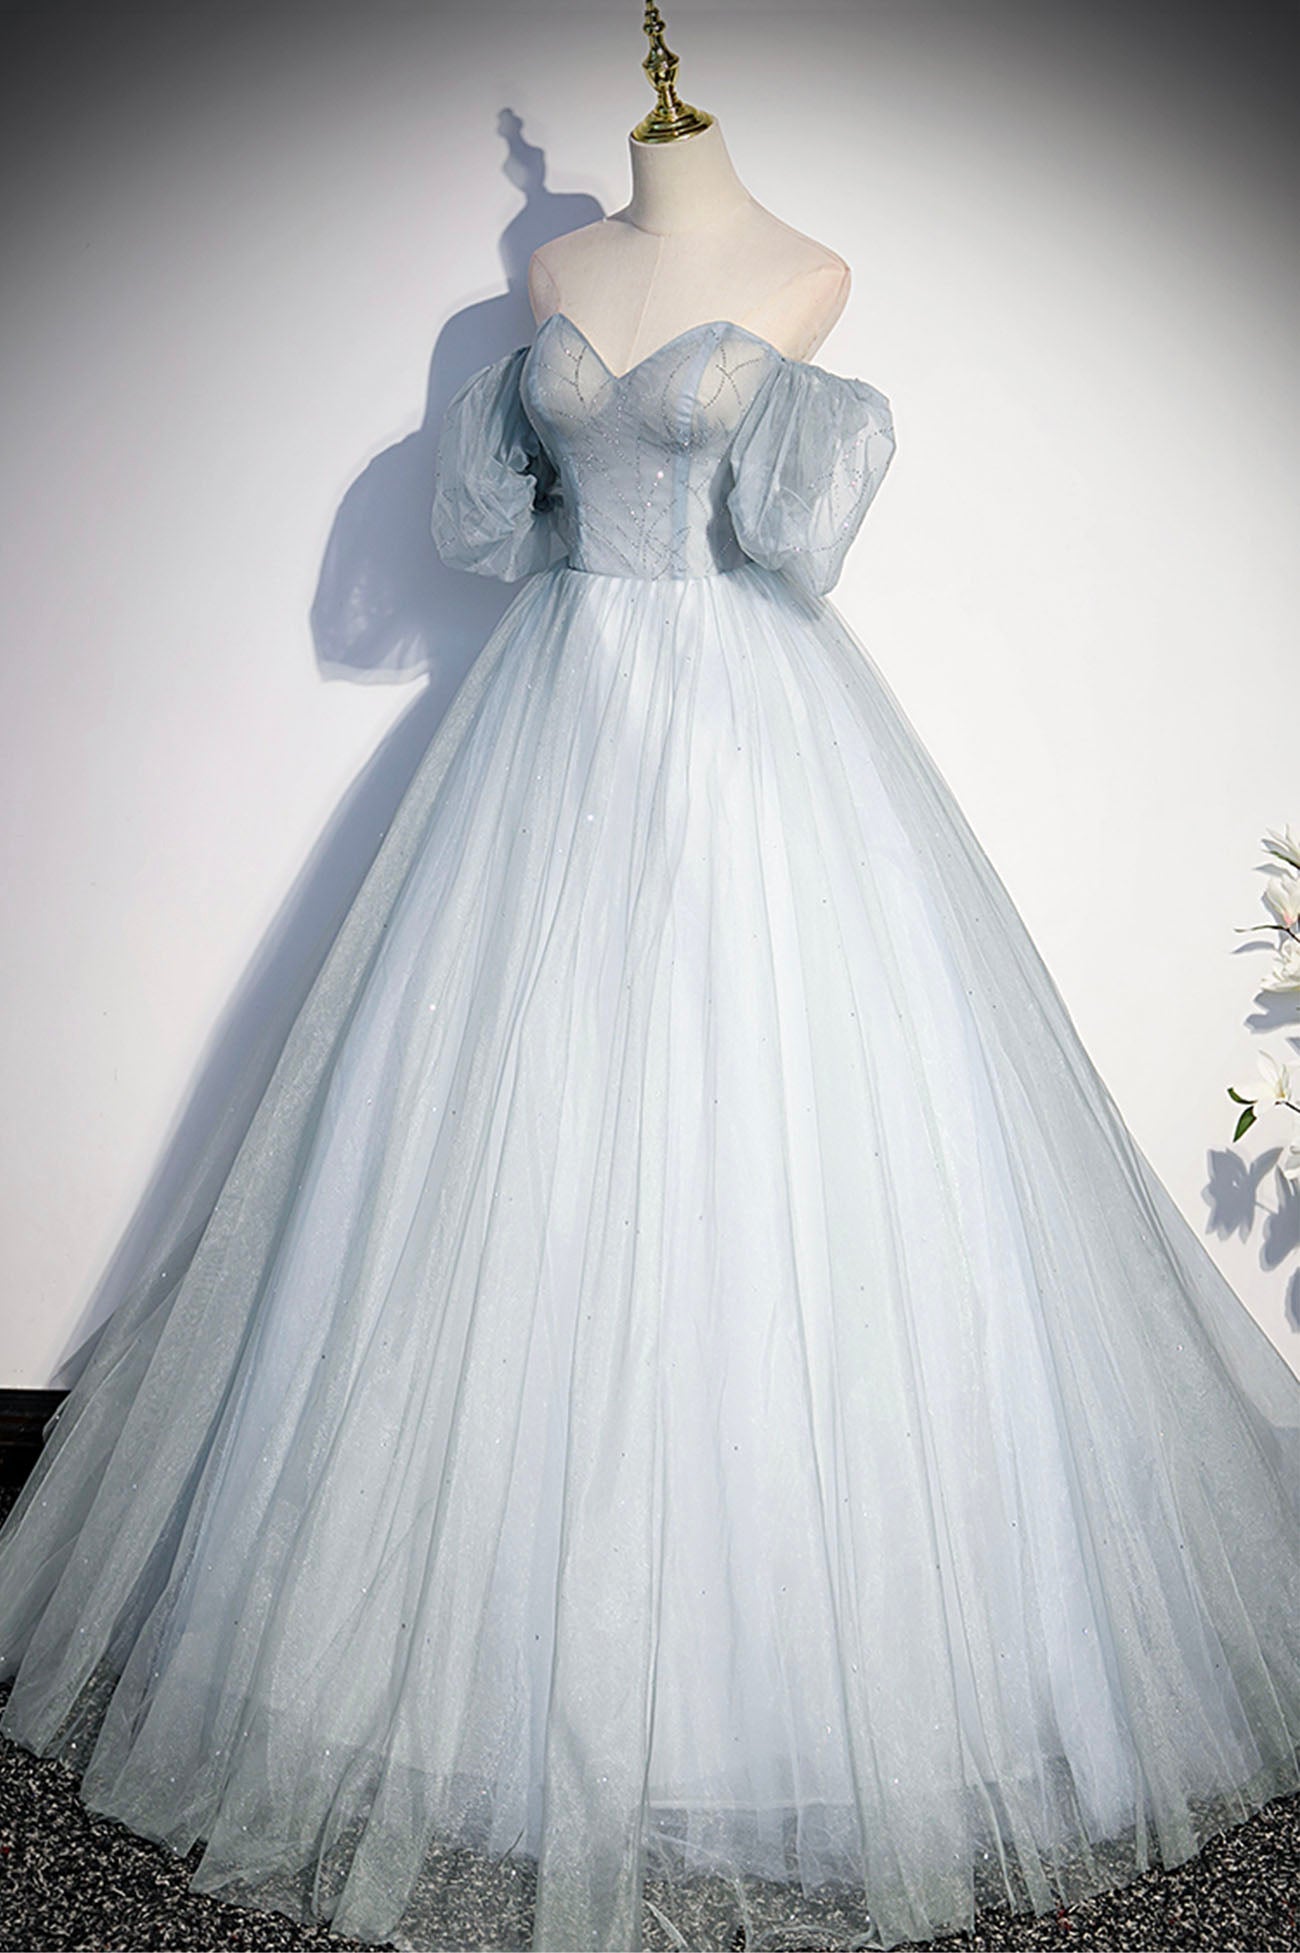 Homecoming Dresses For Middle School, Blue Tulle Long A-Line Ball Gown, Off the Shoulder Formal Evening Dress